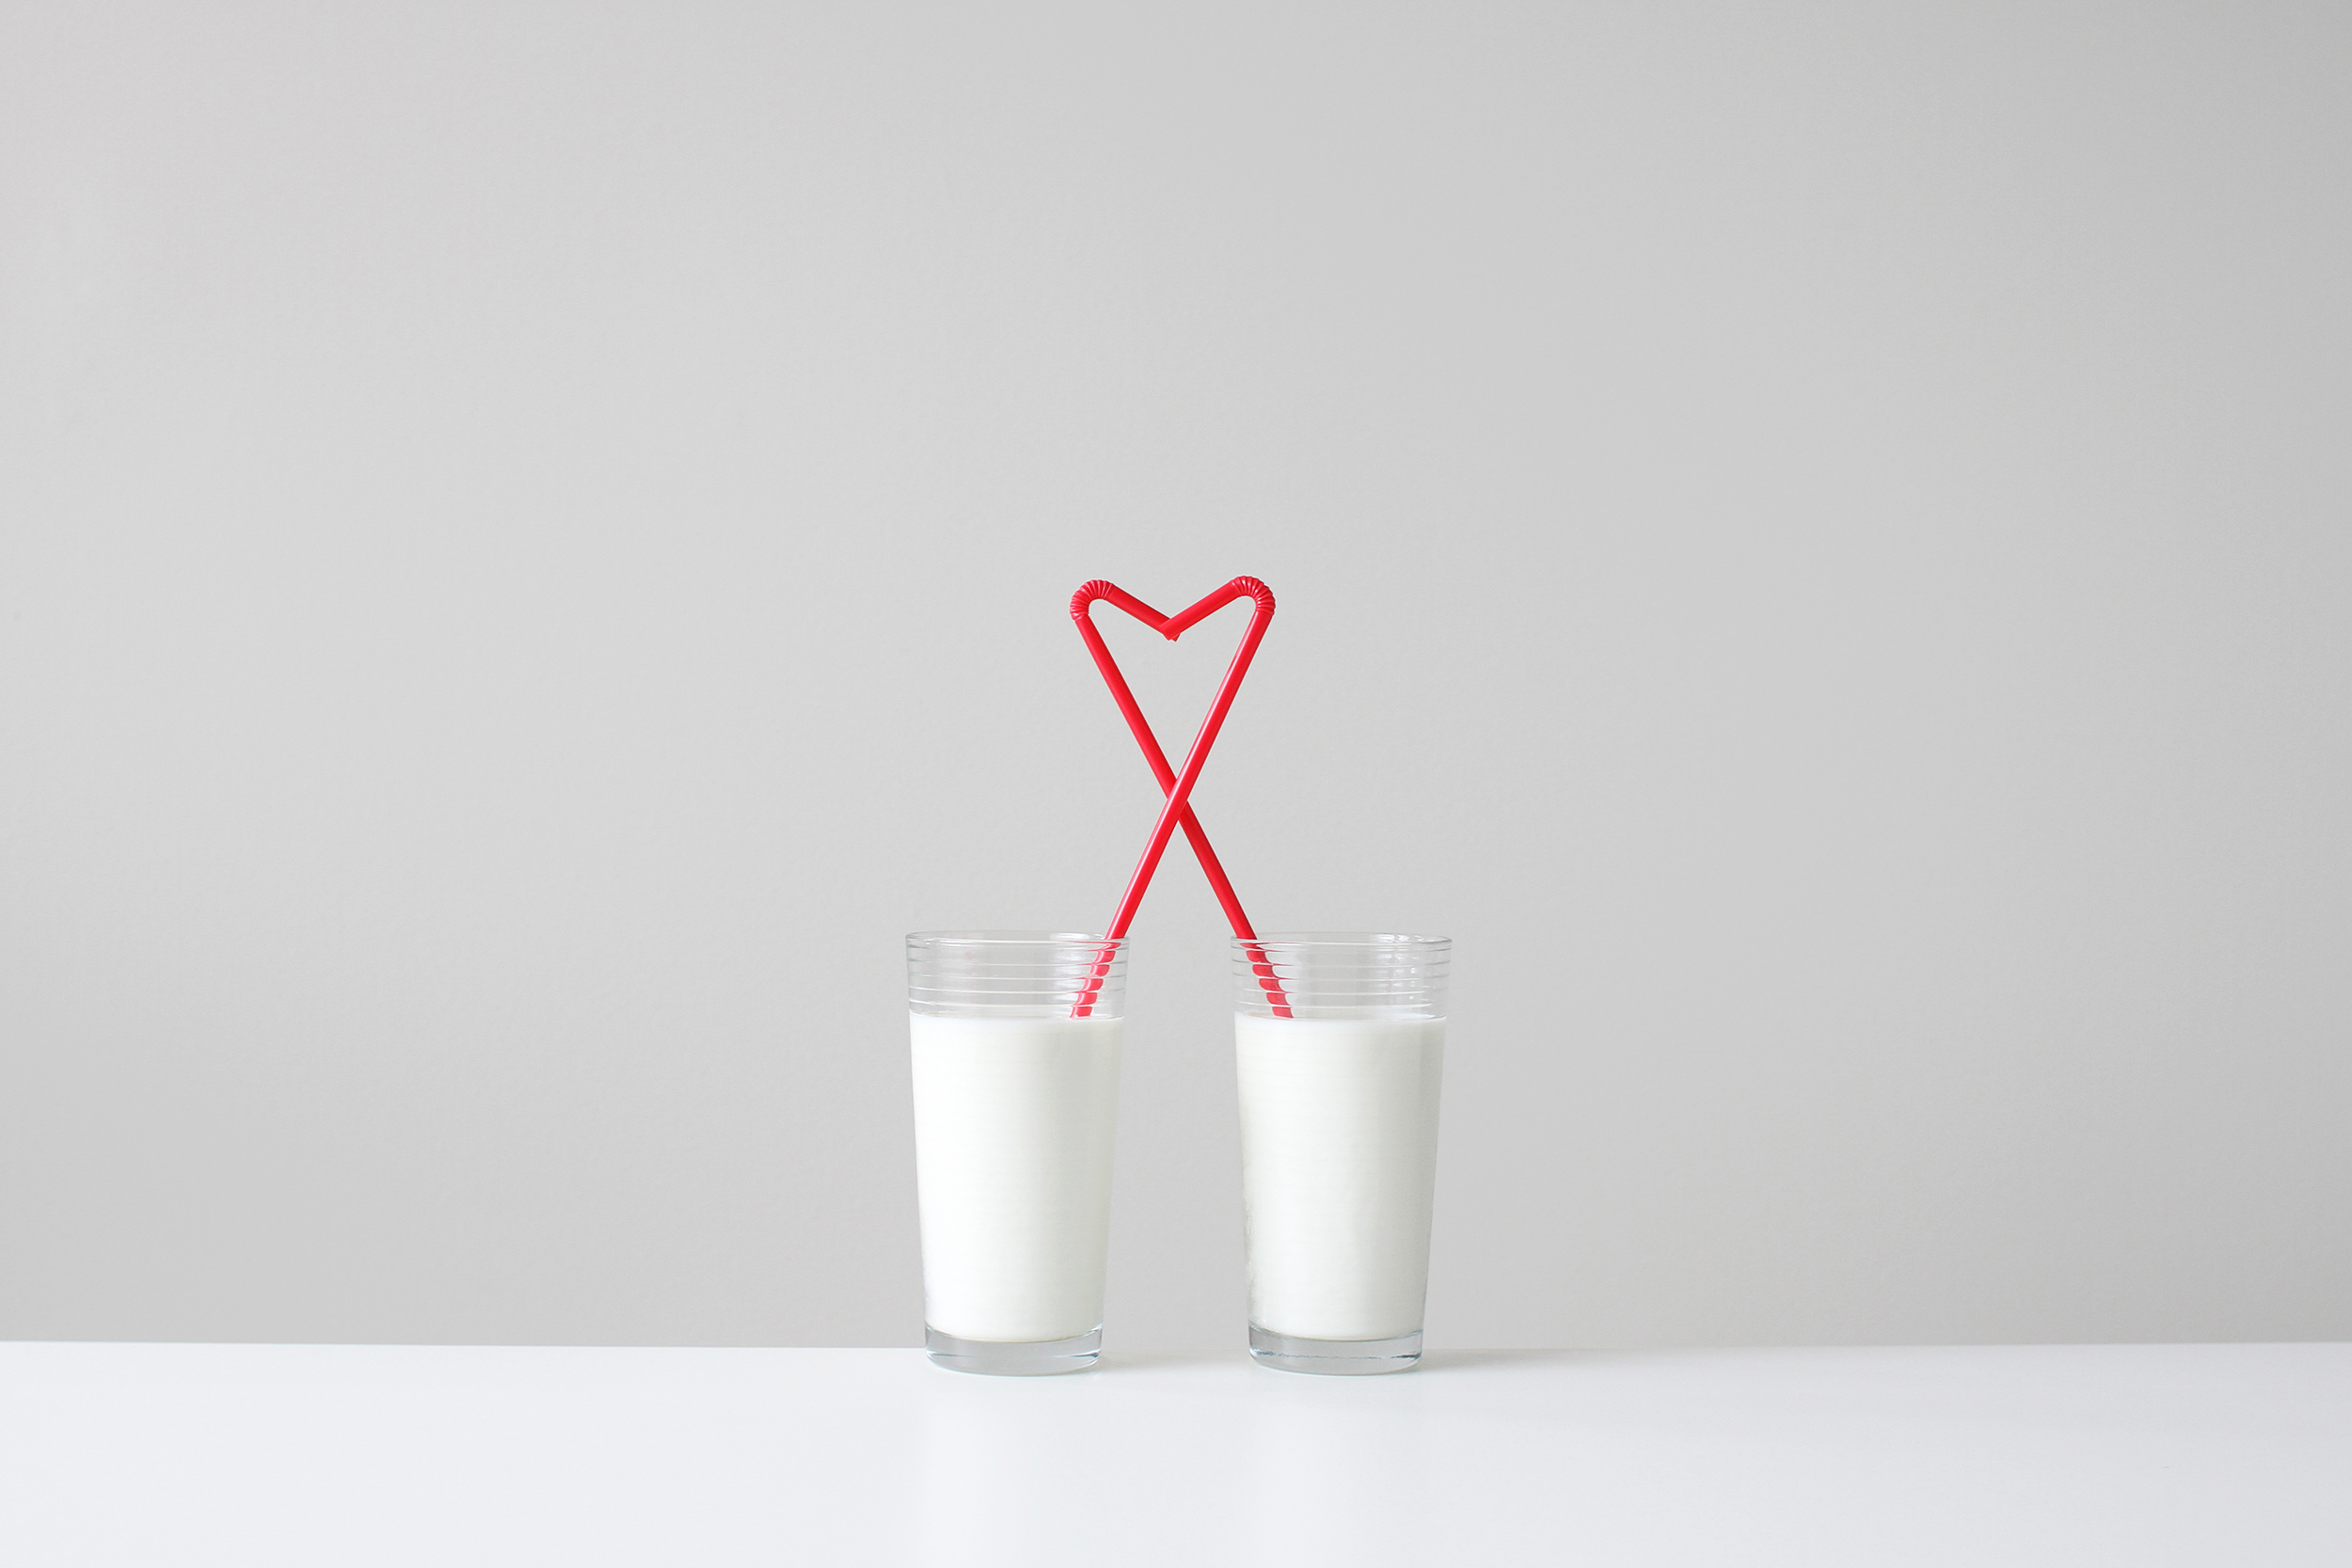 love-two-glasses-milk-hearts-straws-happiness-relationships-motto-stock